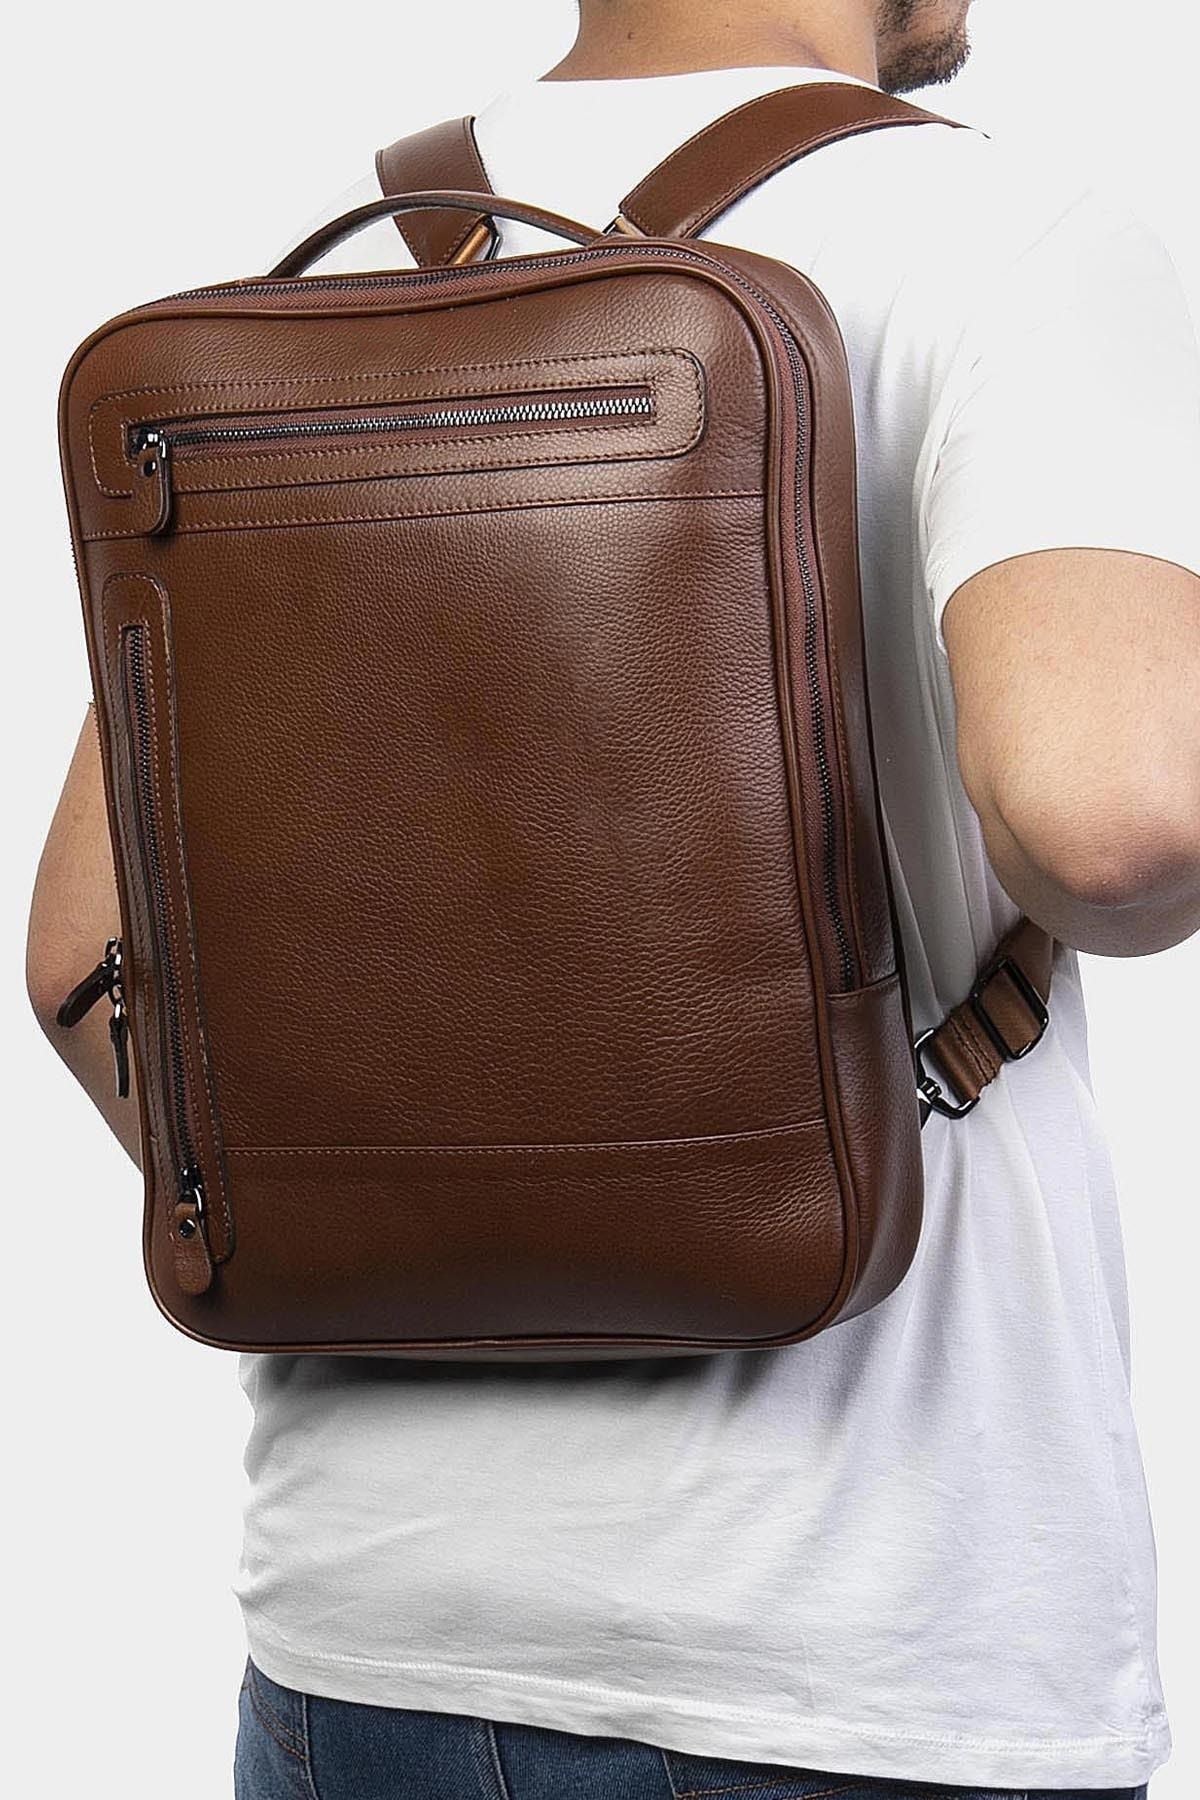 Convertible Laptop Backpack, Use as Laptop Bag, Full Leather, 3 Color Options  99percenthandmade Brown  